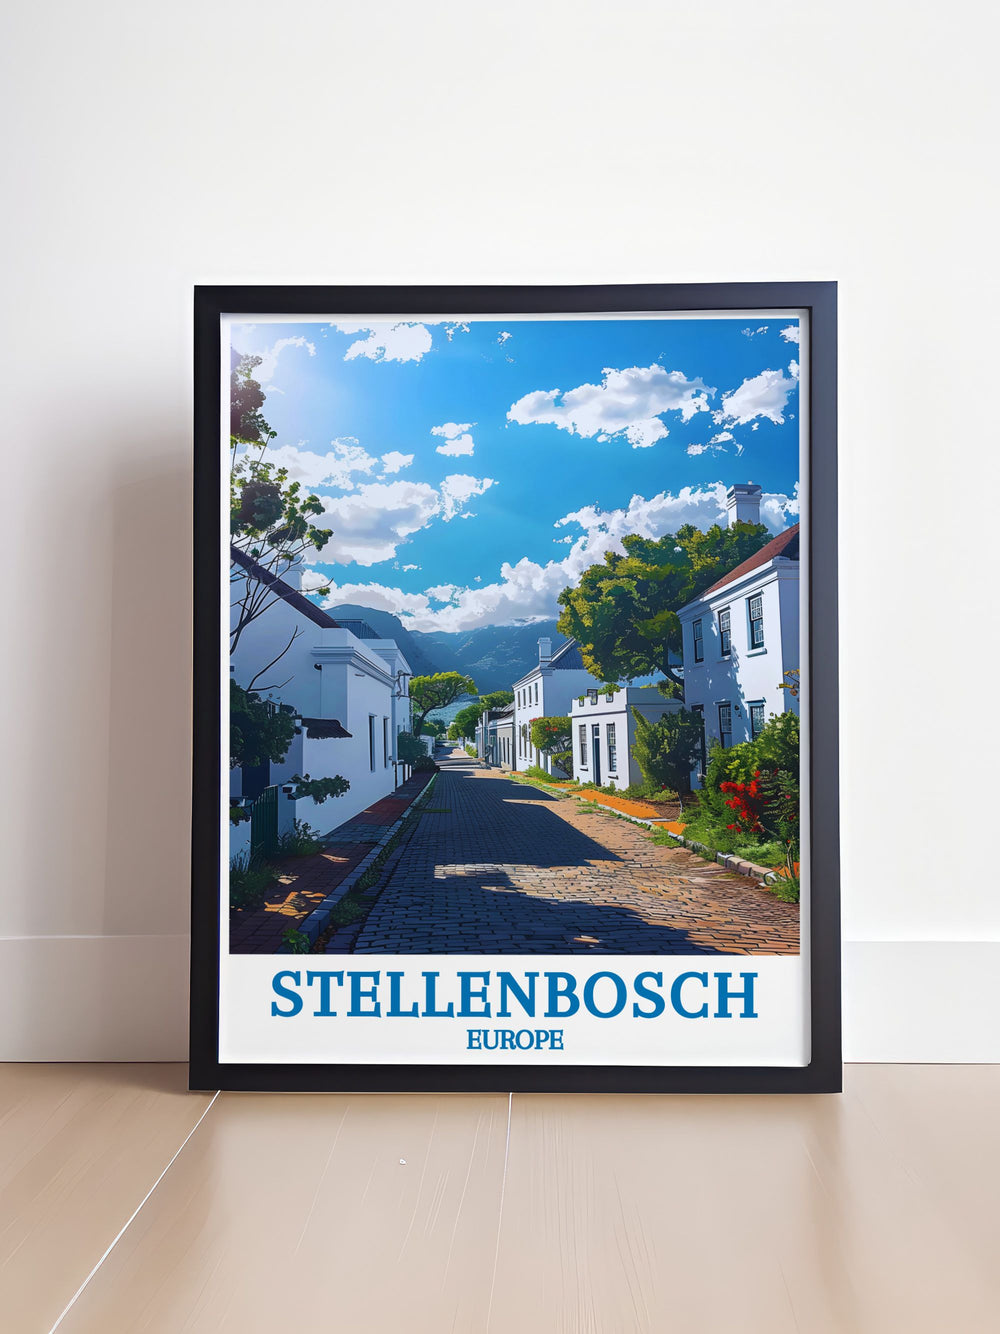 Embrace the cultural vibrancy and historic allure of Stellenbosch with this travel poster, depicting the scenic beauty of Dorp Street.